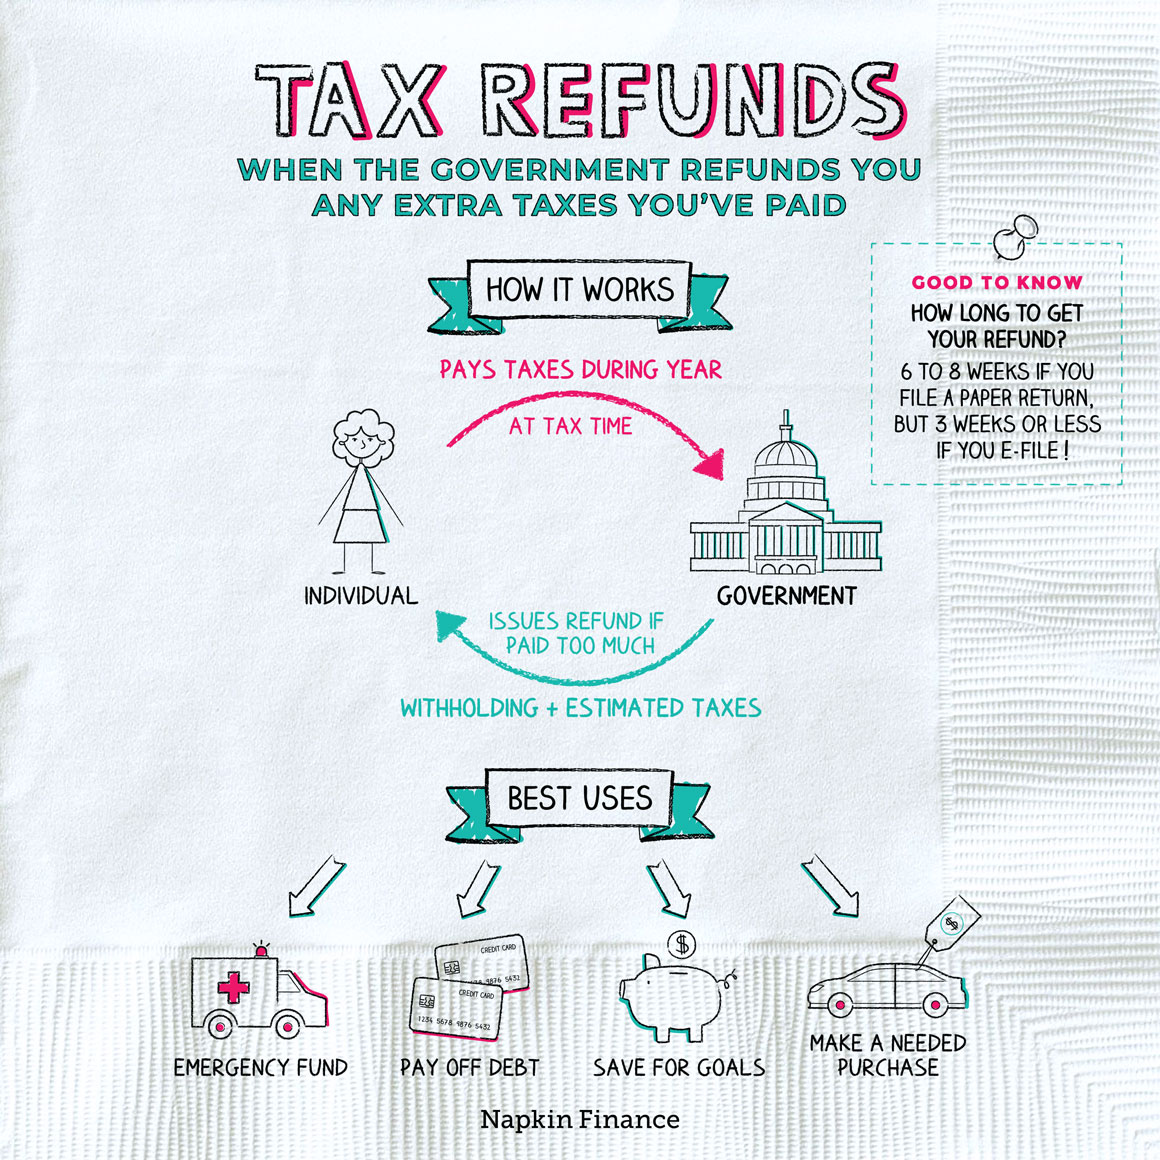 How to get tax refund?